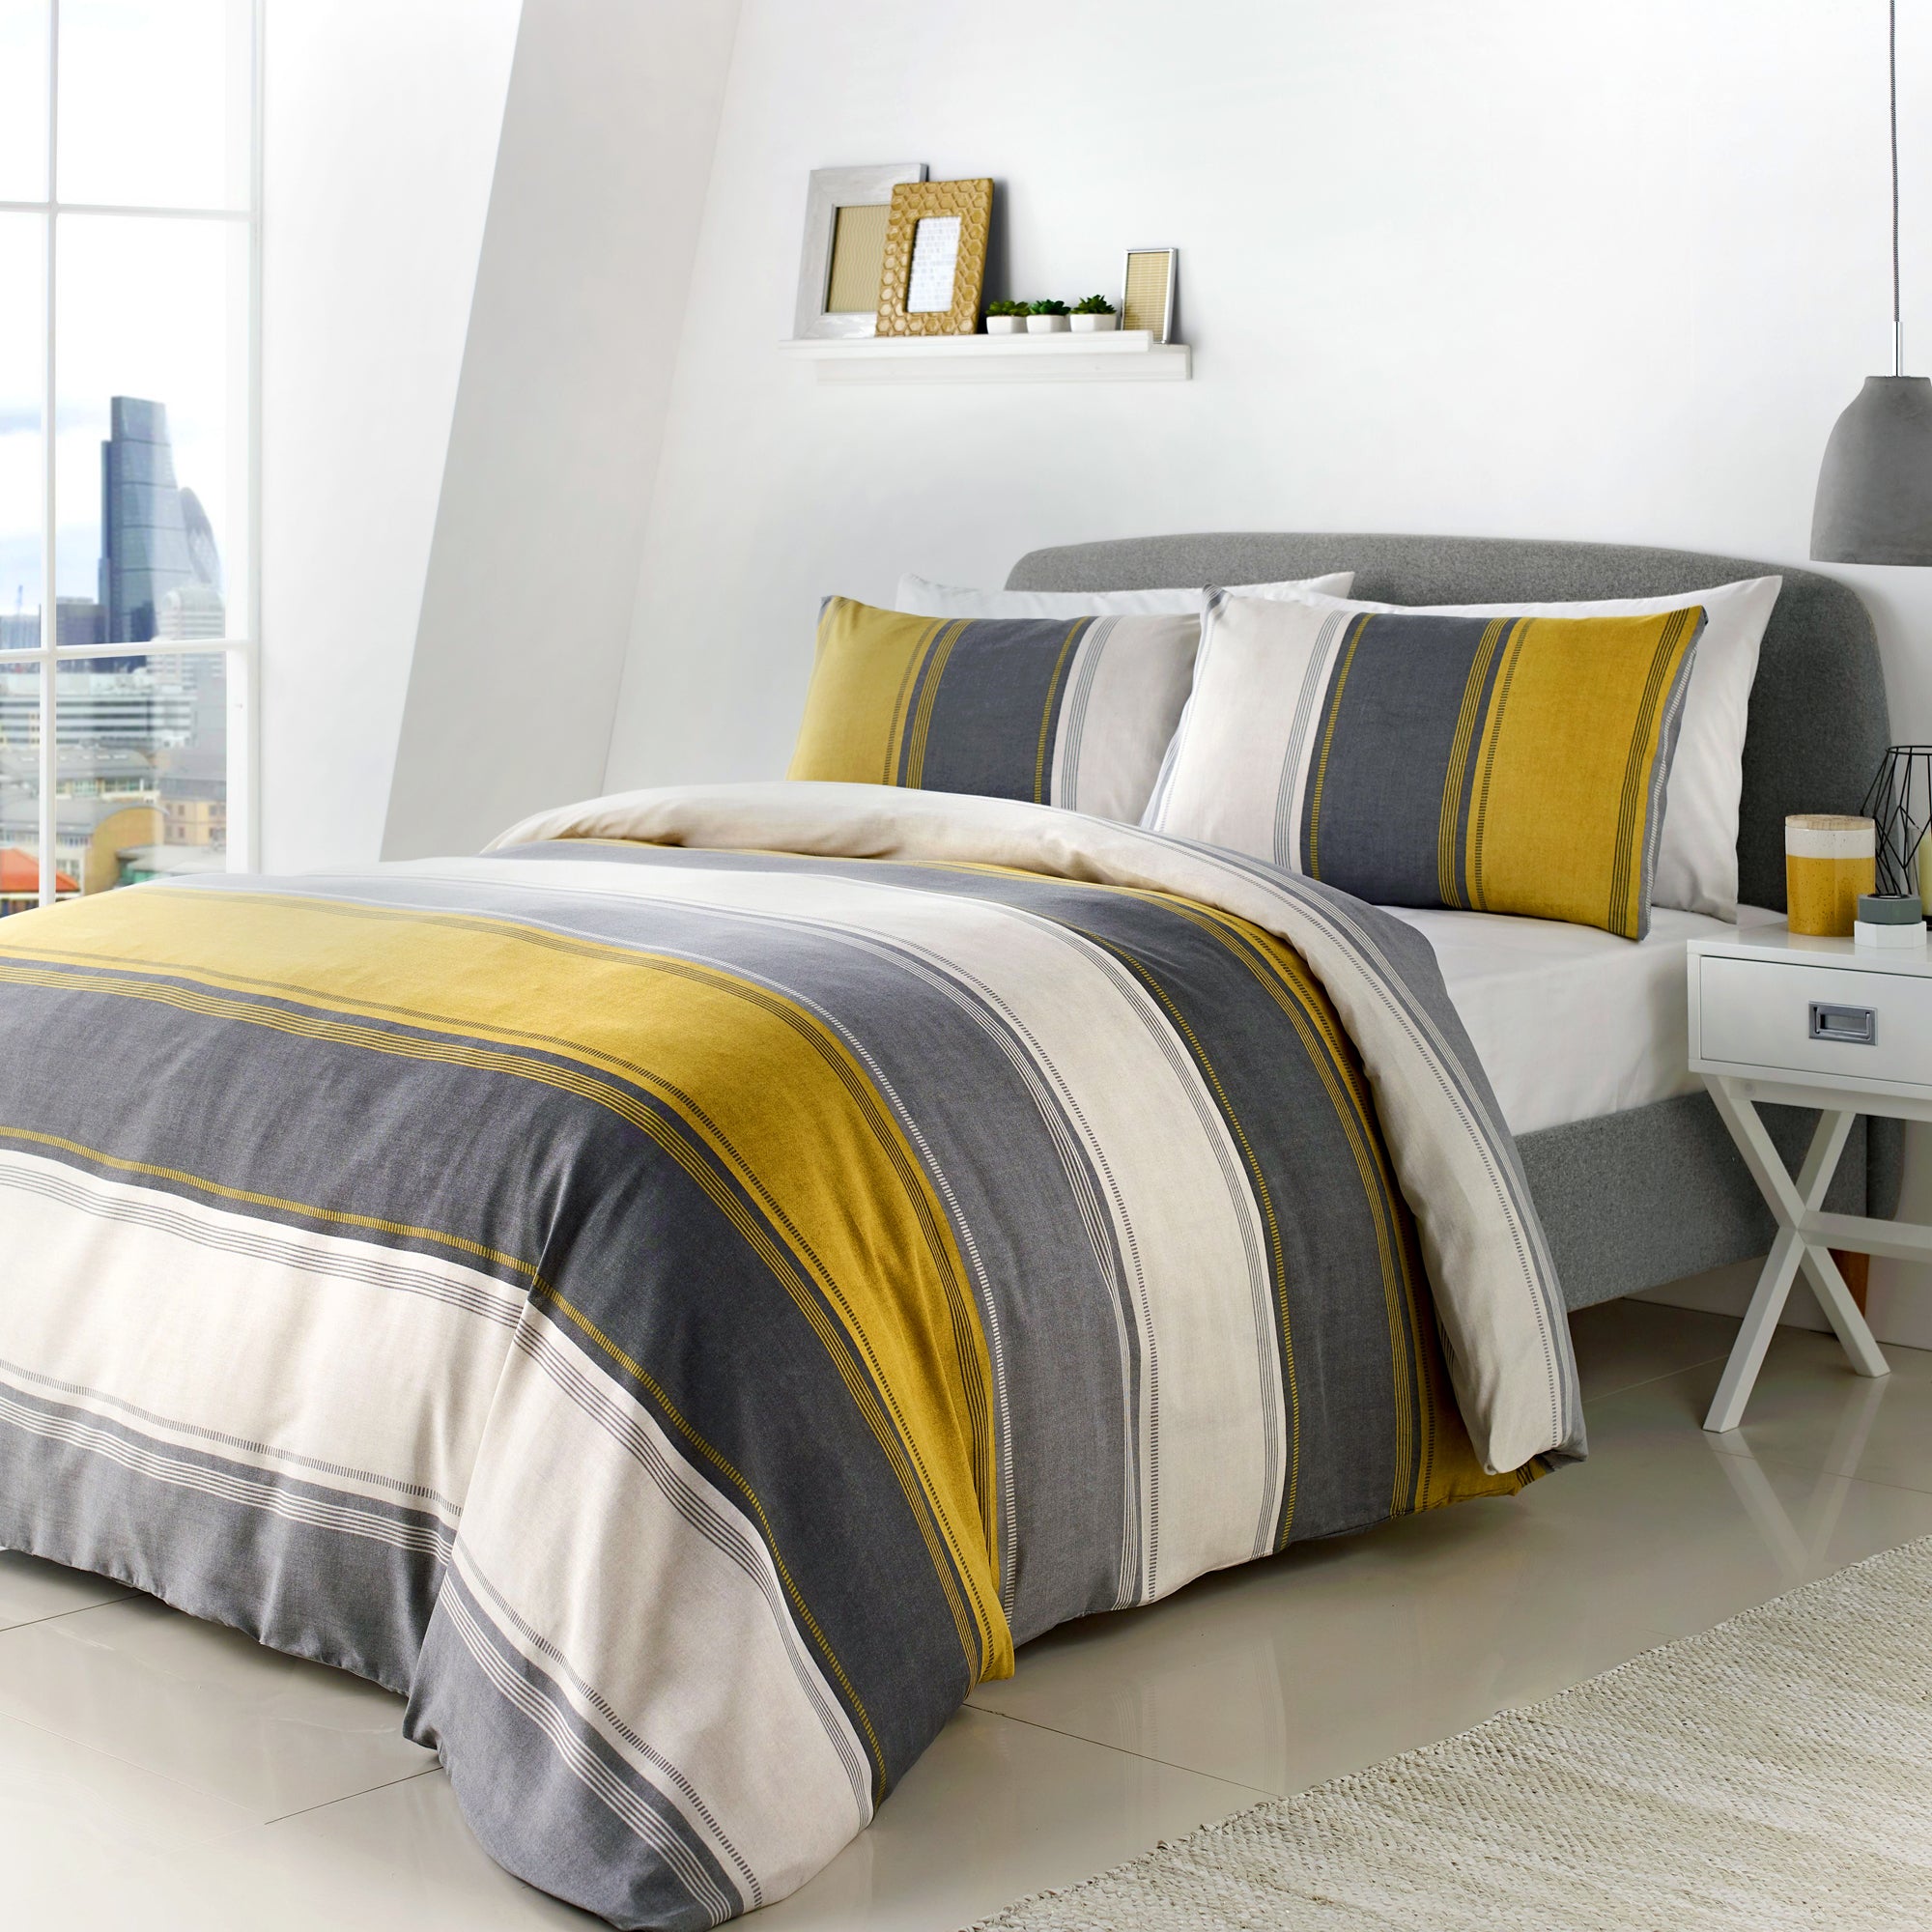 Betley Ochre - Easy Care Duvet Cover Set - By Fusion